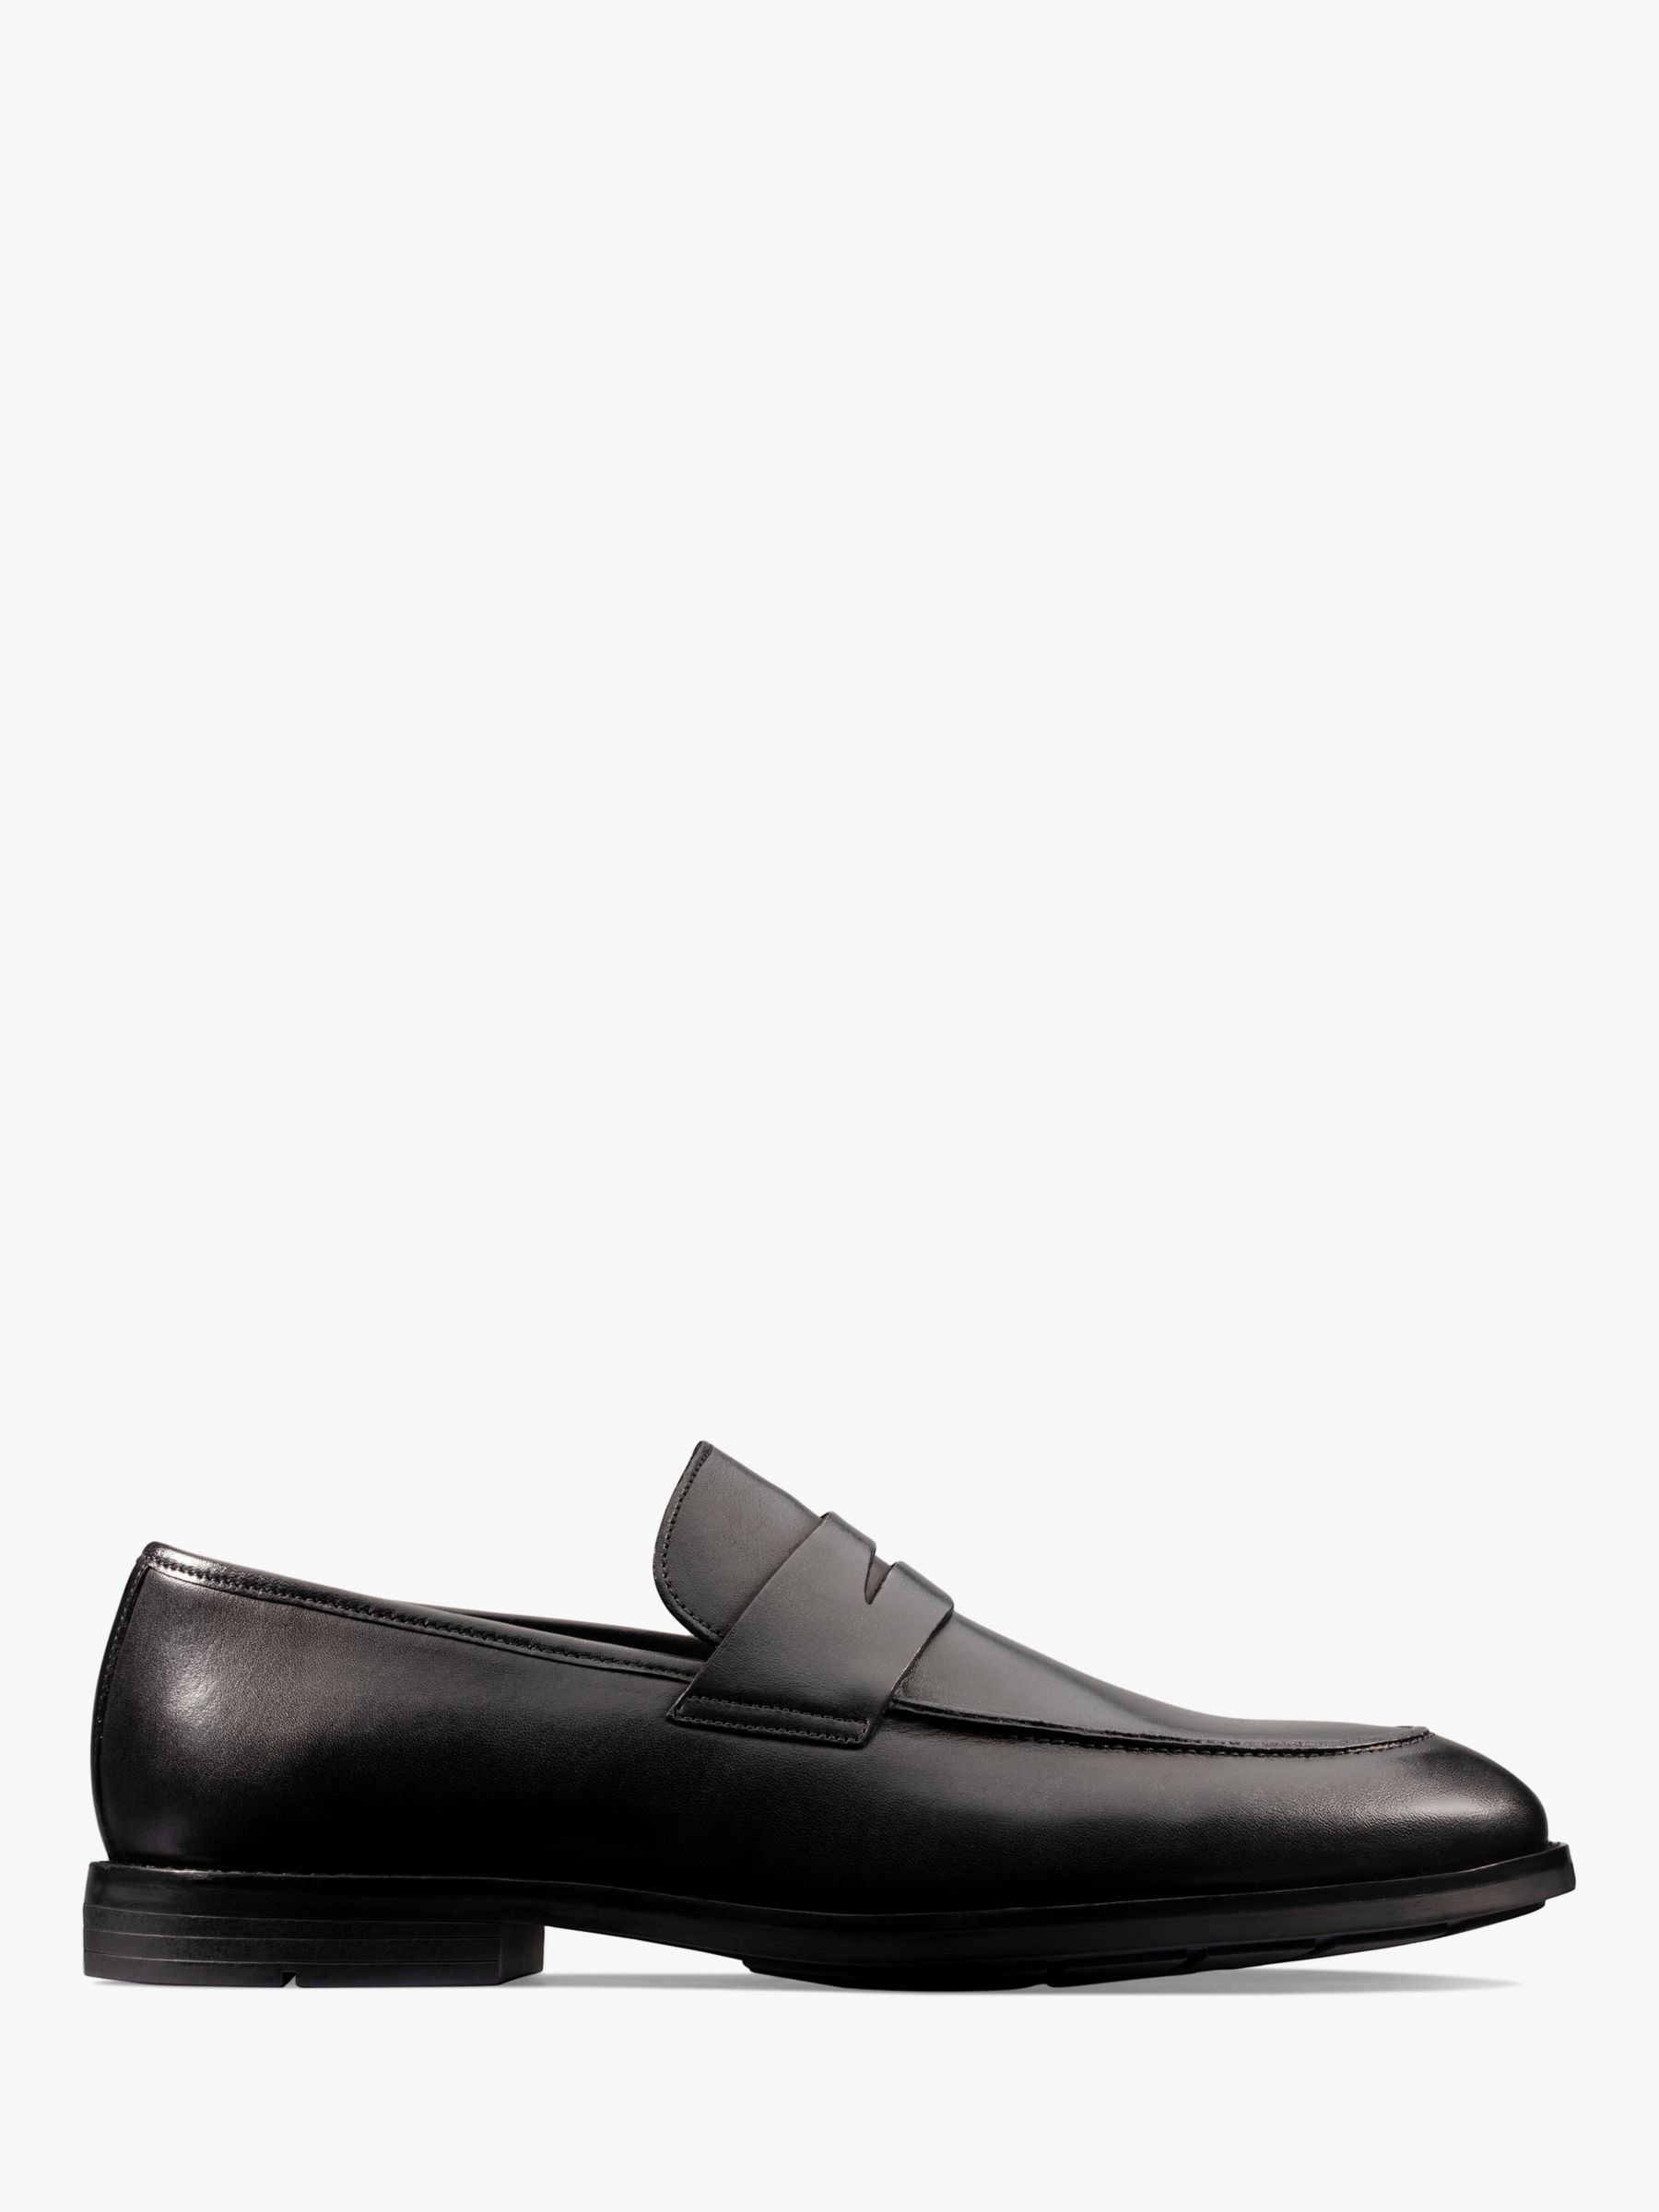 Clarks Ronnie Step Leather Loafers, Black